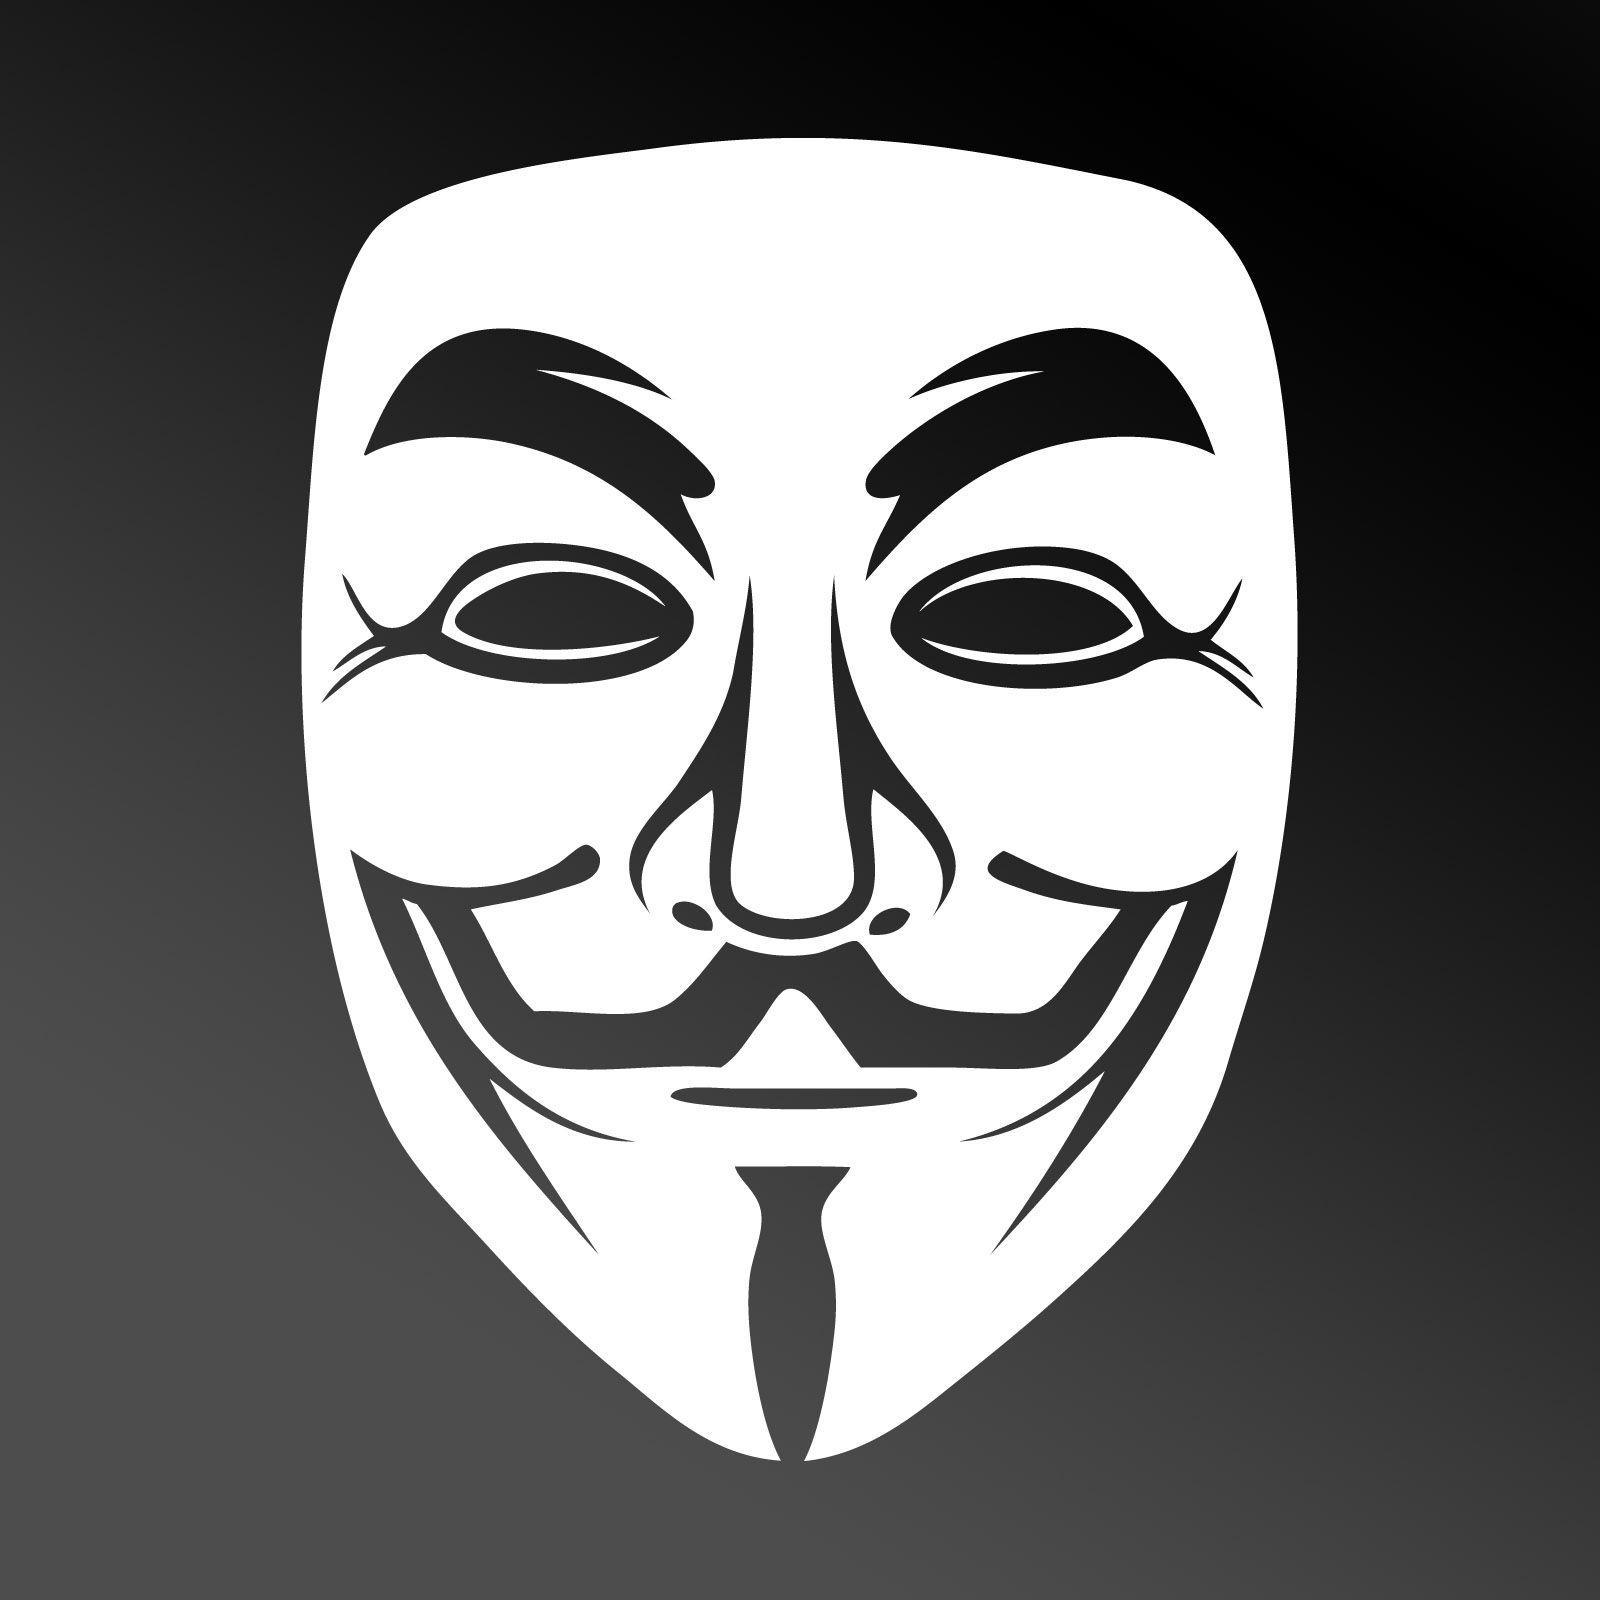 2880x1800px Guy Fawkes Mask (305.05 KB).04.2015